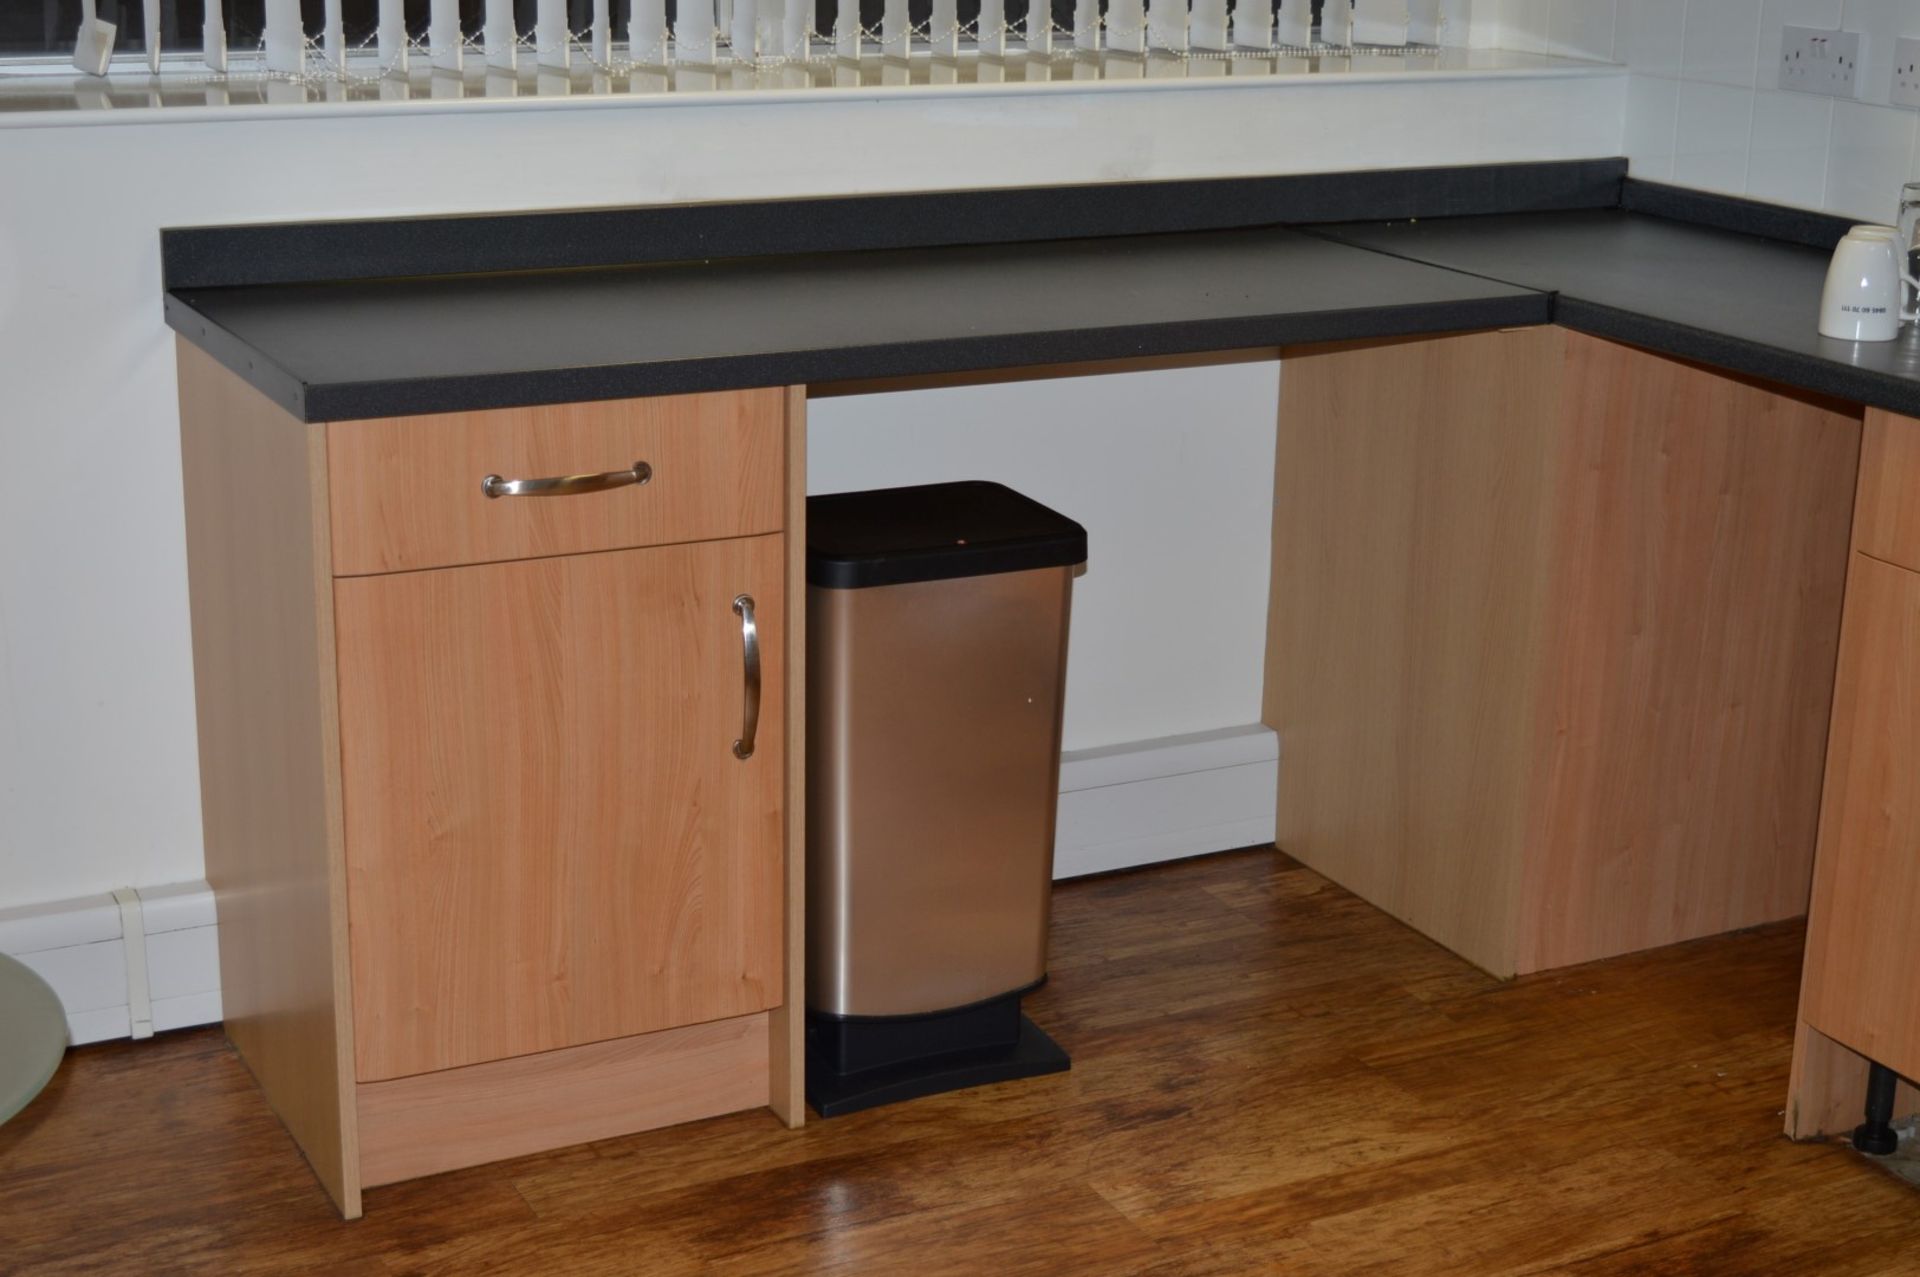 1 x Contemporary Kitchen - Includes Selection of Carcasses With Beech Doors, Chrome Handles, Black - Image 2 of 9